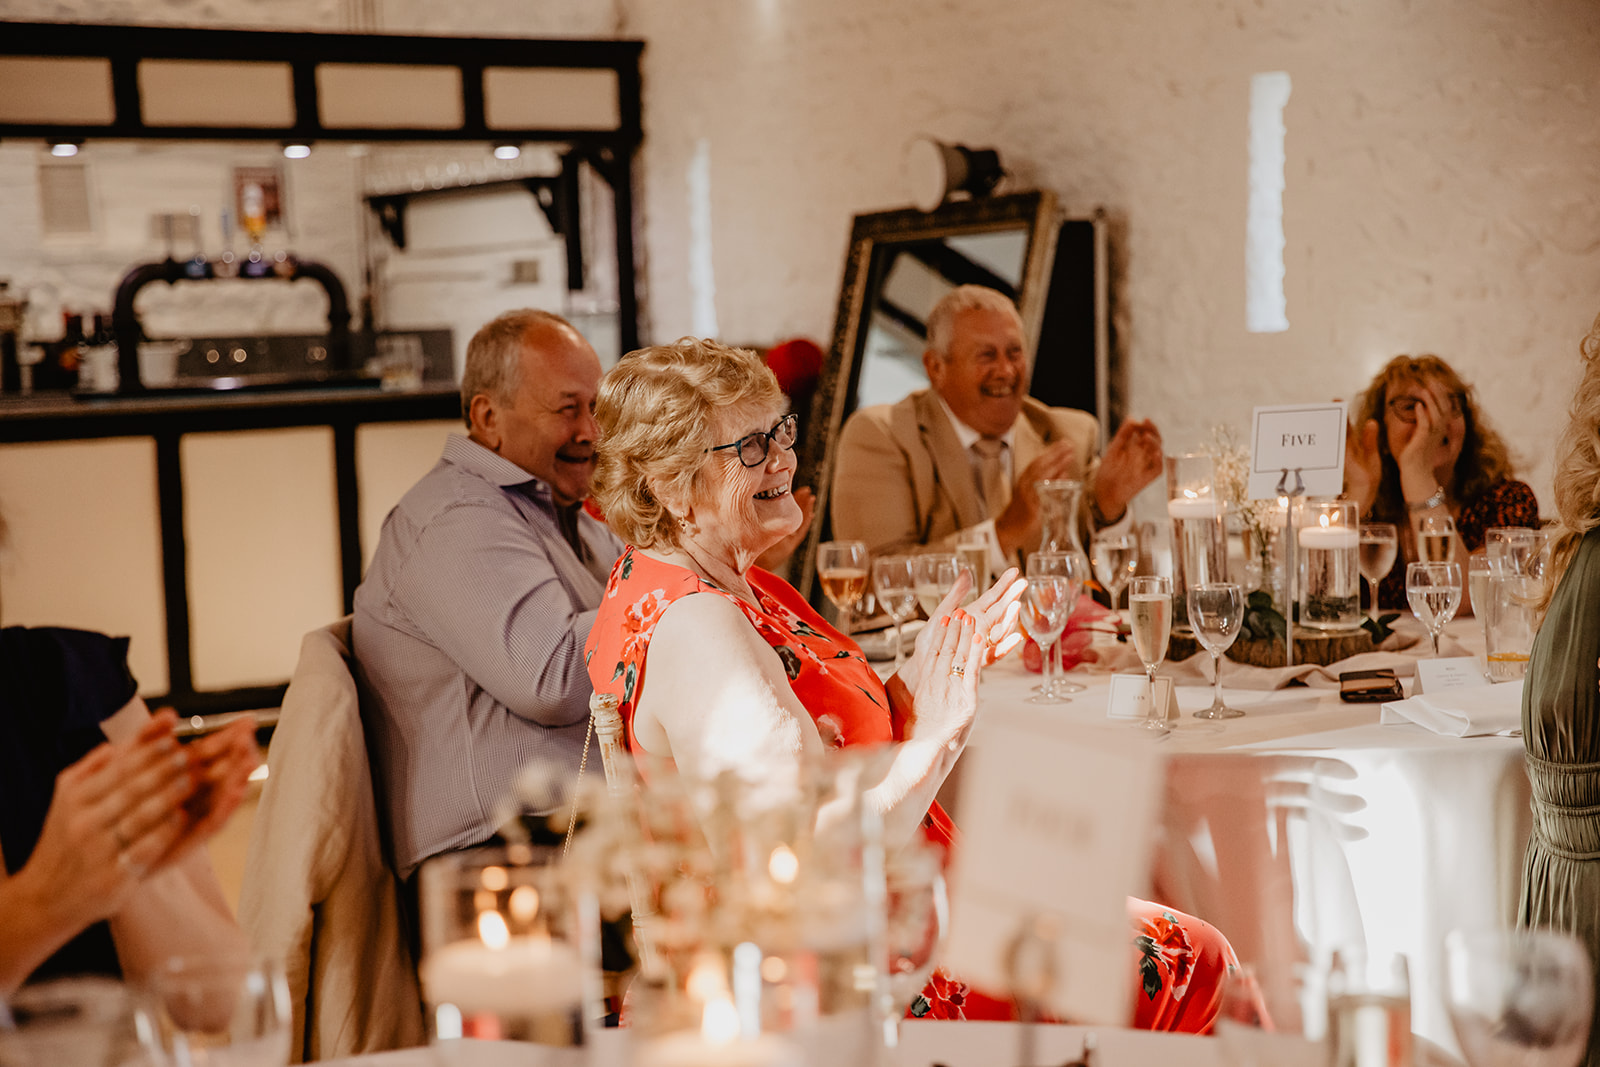 Wedding Reception at a Field Place Manor House Wedding in Worthing, Sussex. By Olive Joy Photography